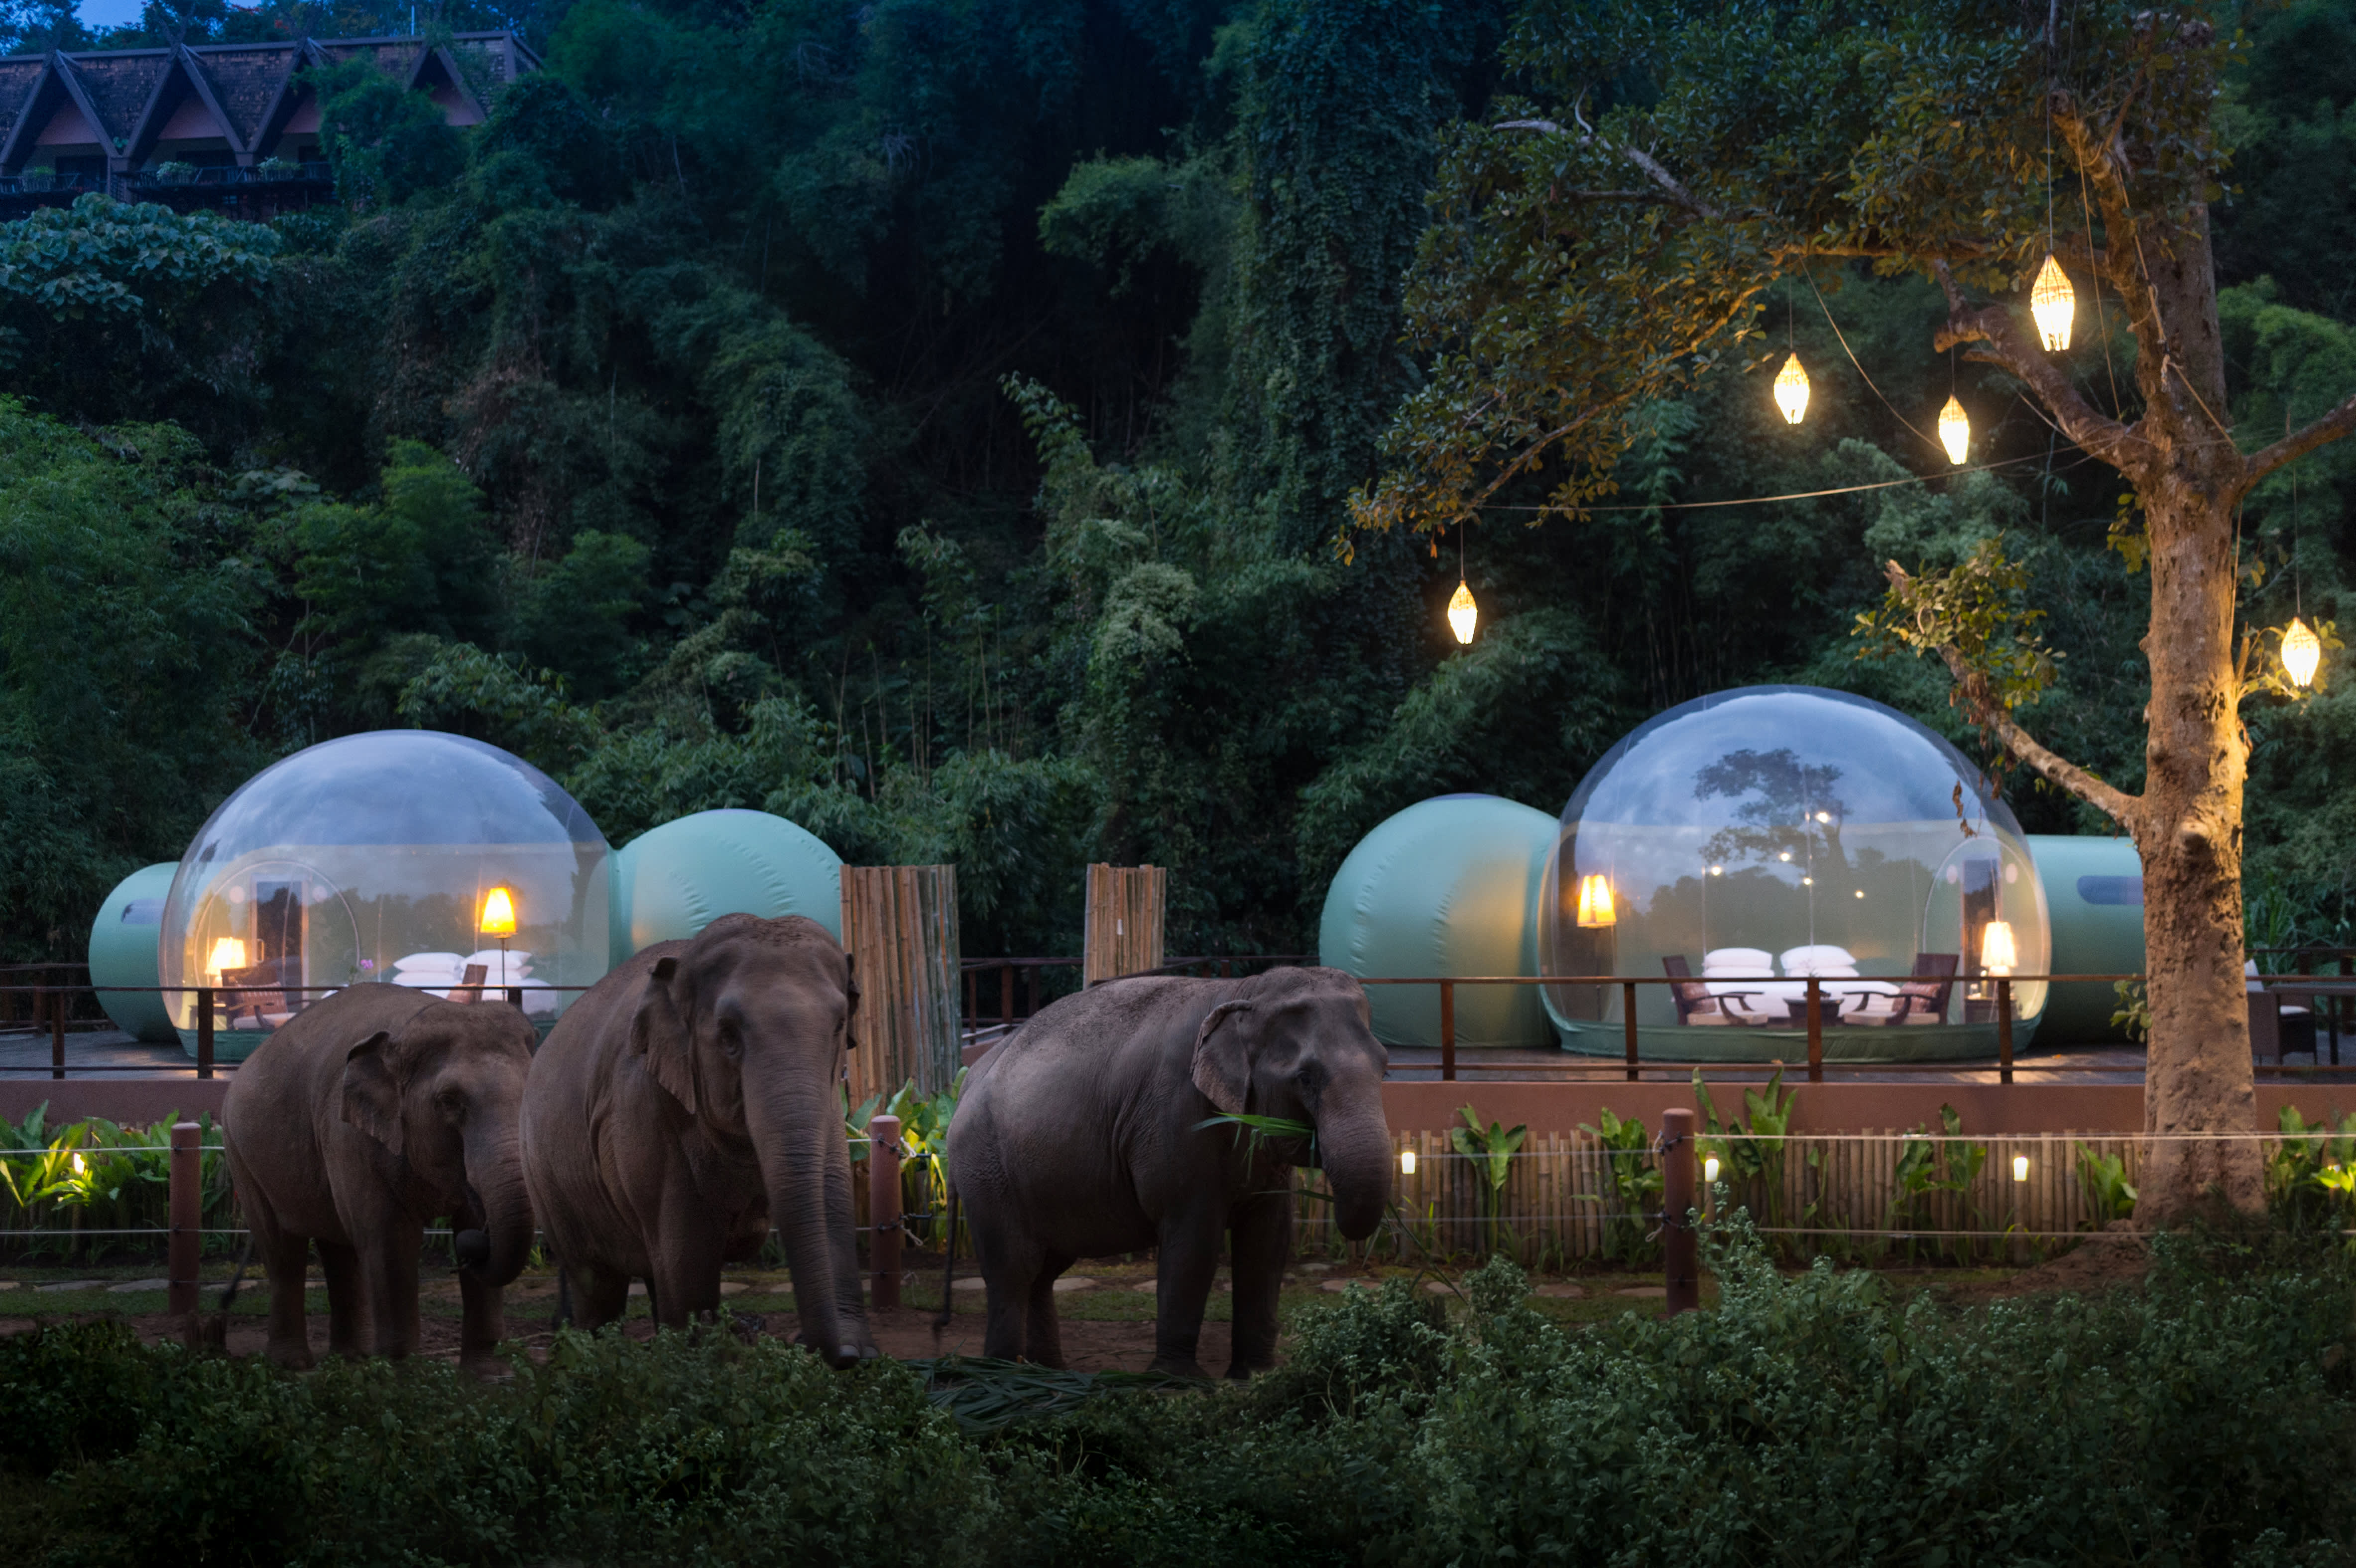 Elephant Sanctuaries in Thailand: A Haven for These Gentle Giants